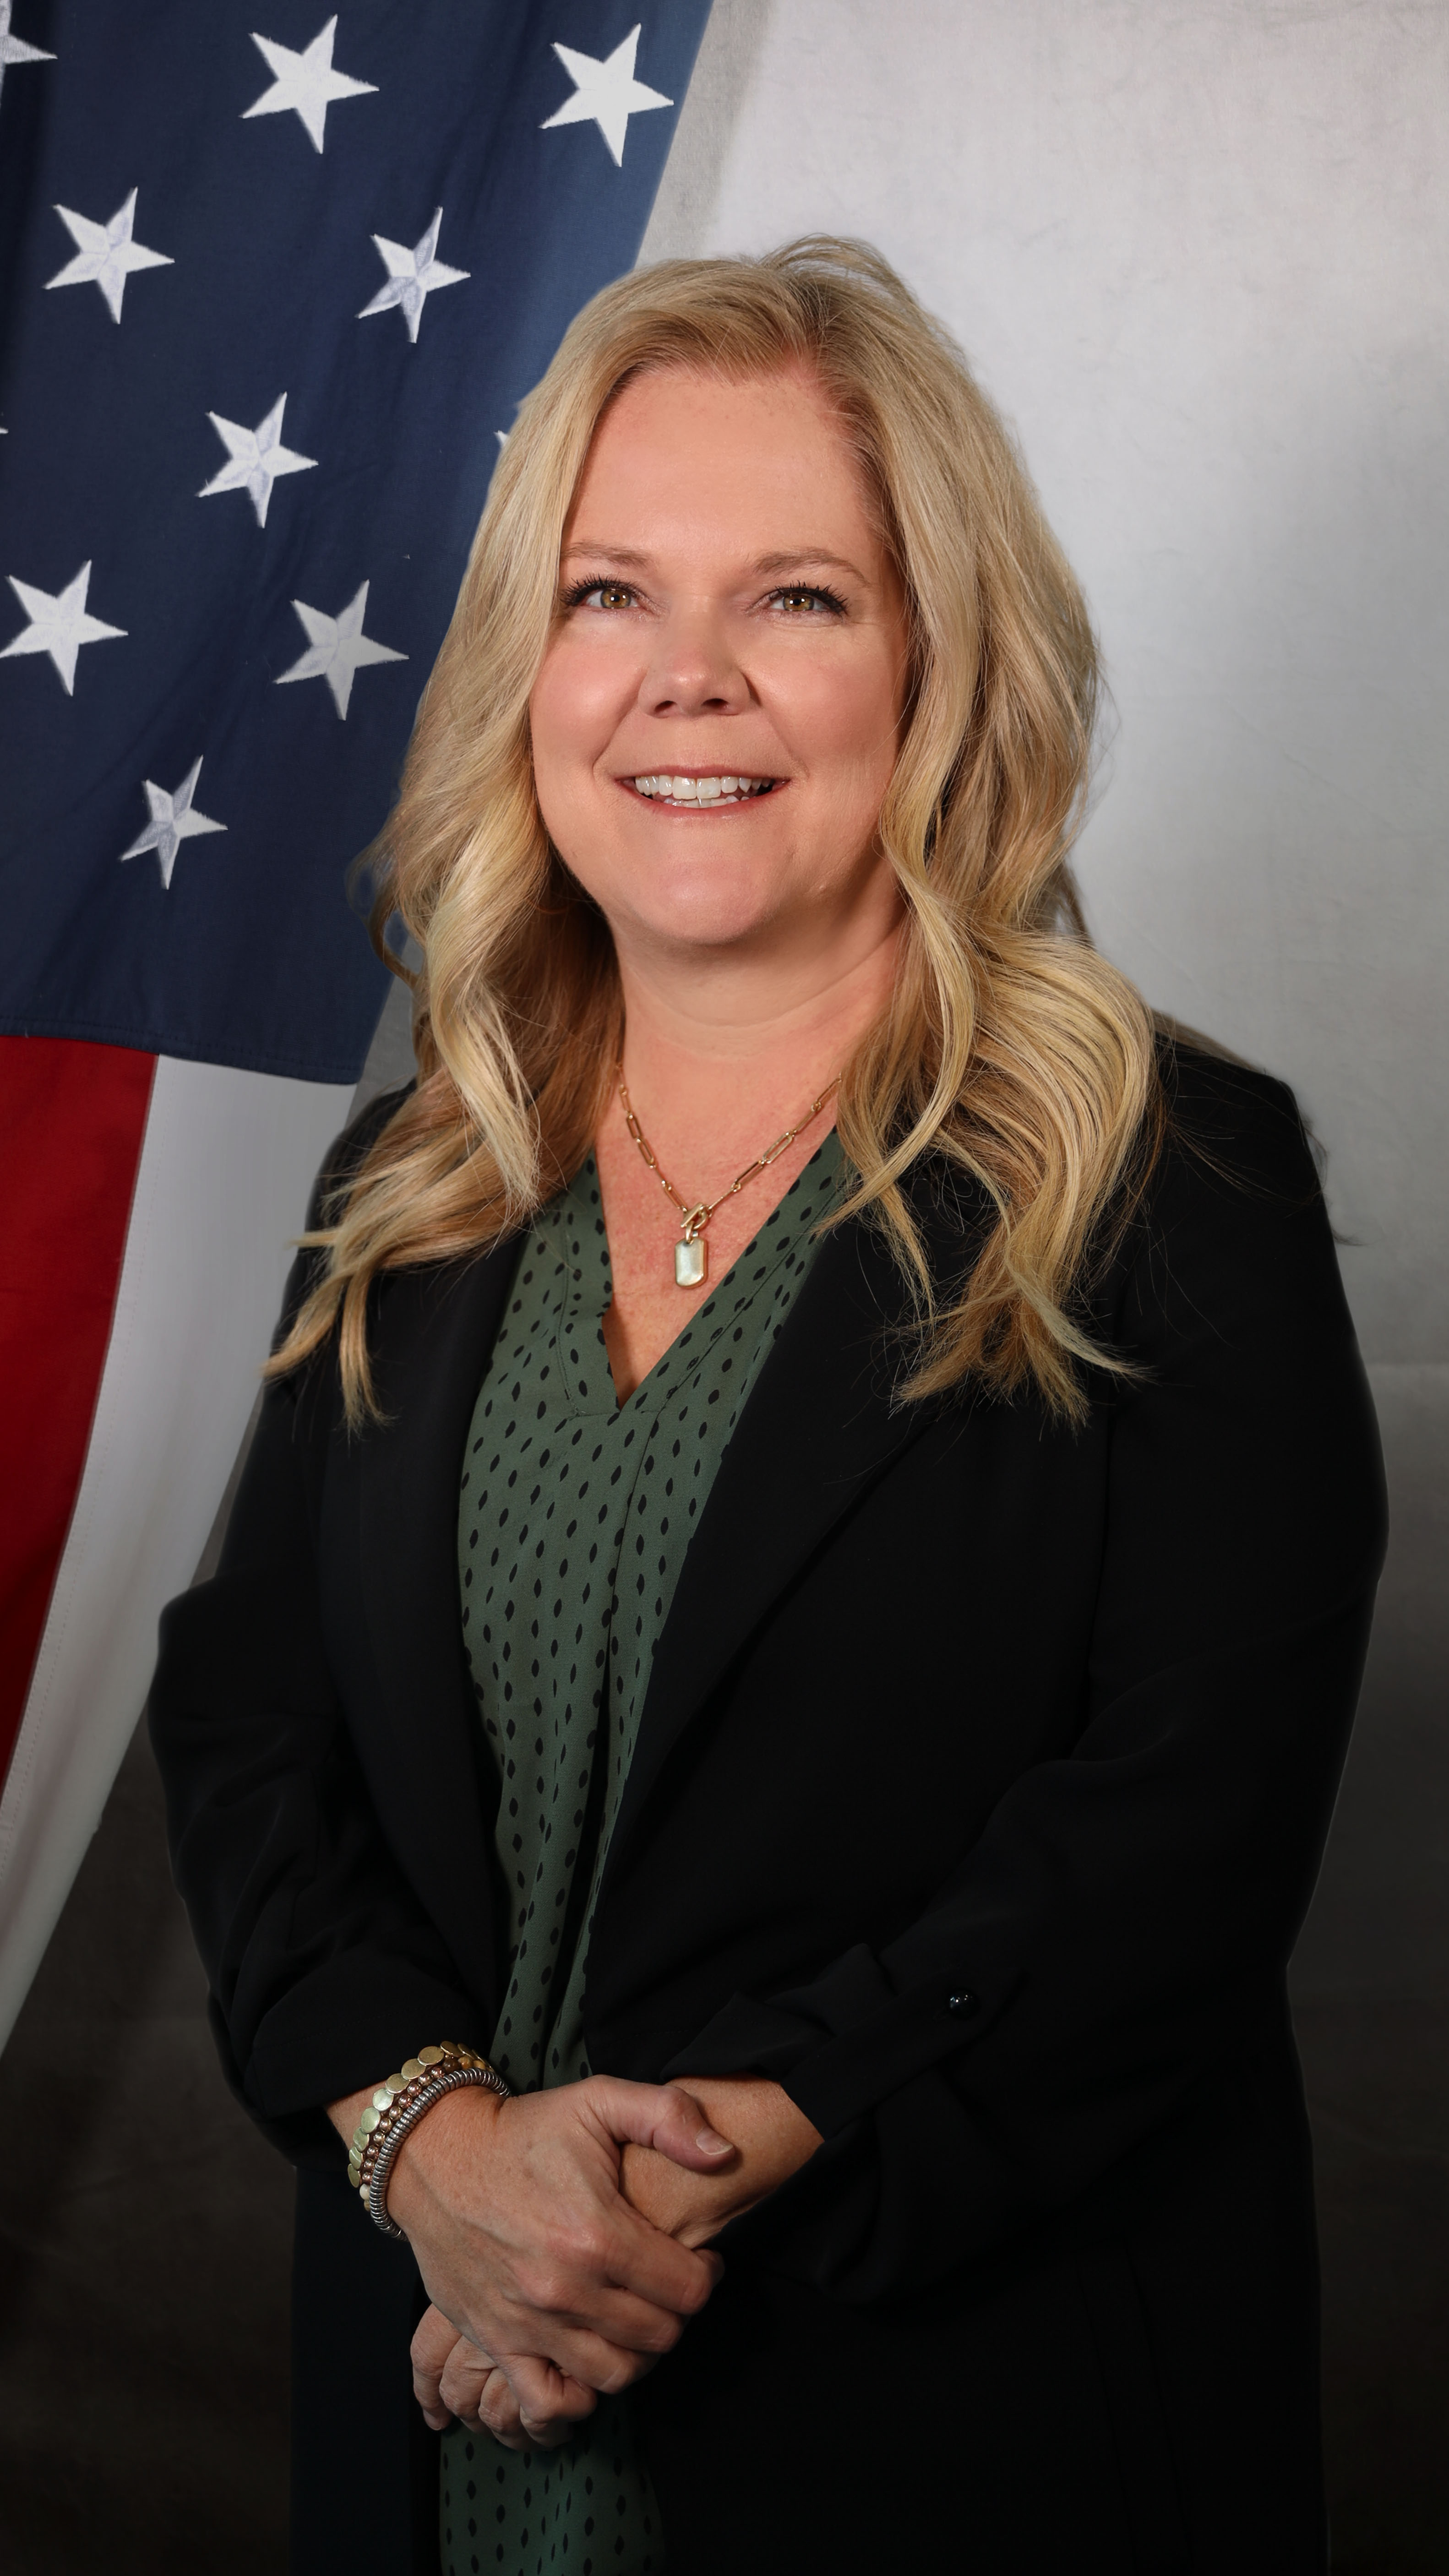 Agency photo of the Adams County Sheriff's Office Human Resources Director